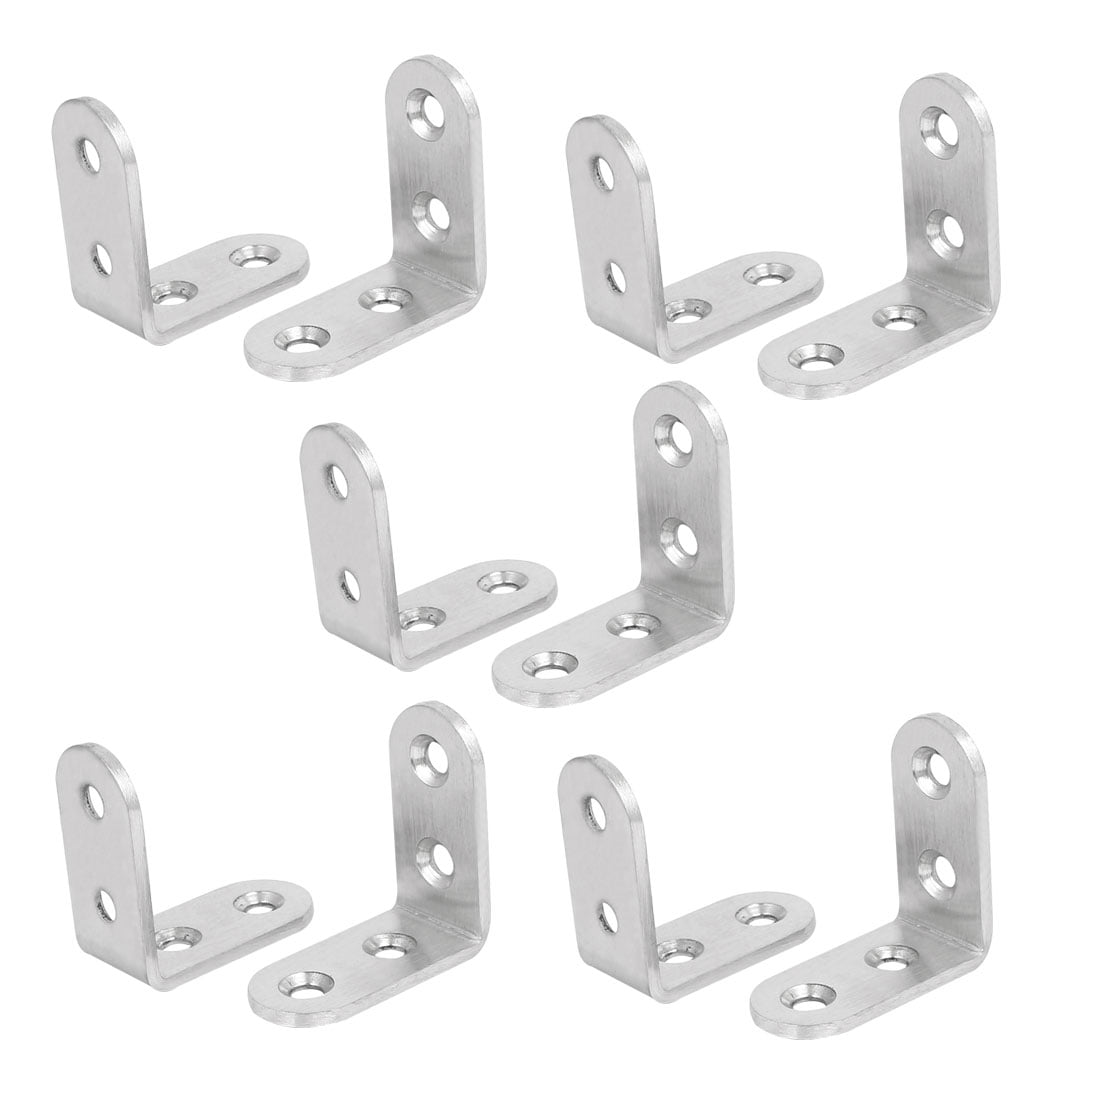 Uxcell Wall Mounting Shelf Support Angle Bracket Silver Tone 18